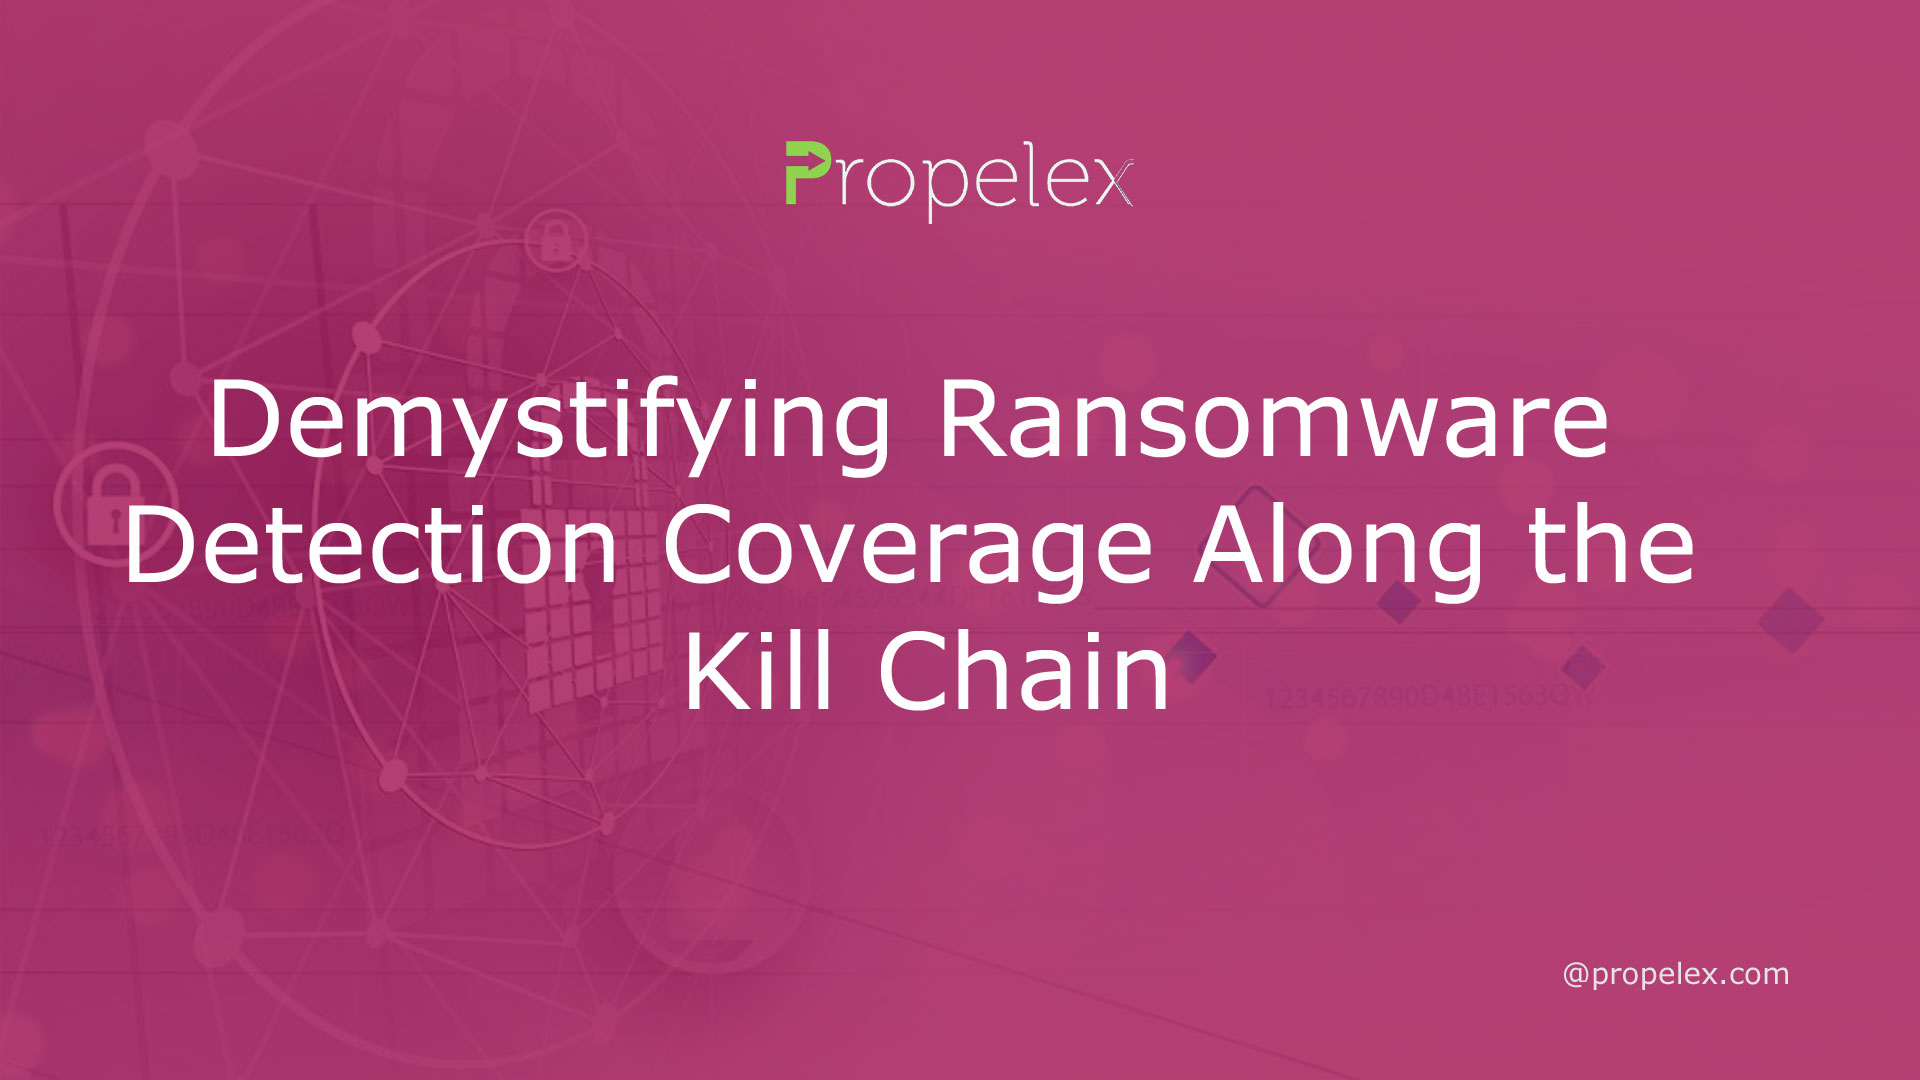 Demystifying Ransomware Detection Coverage Along the Kill Chain